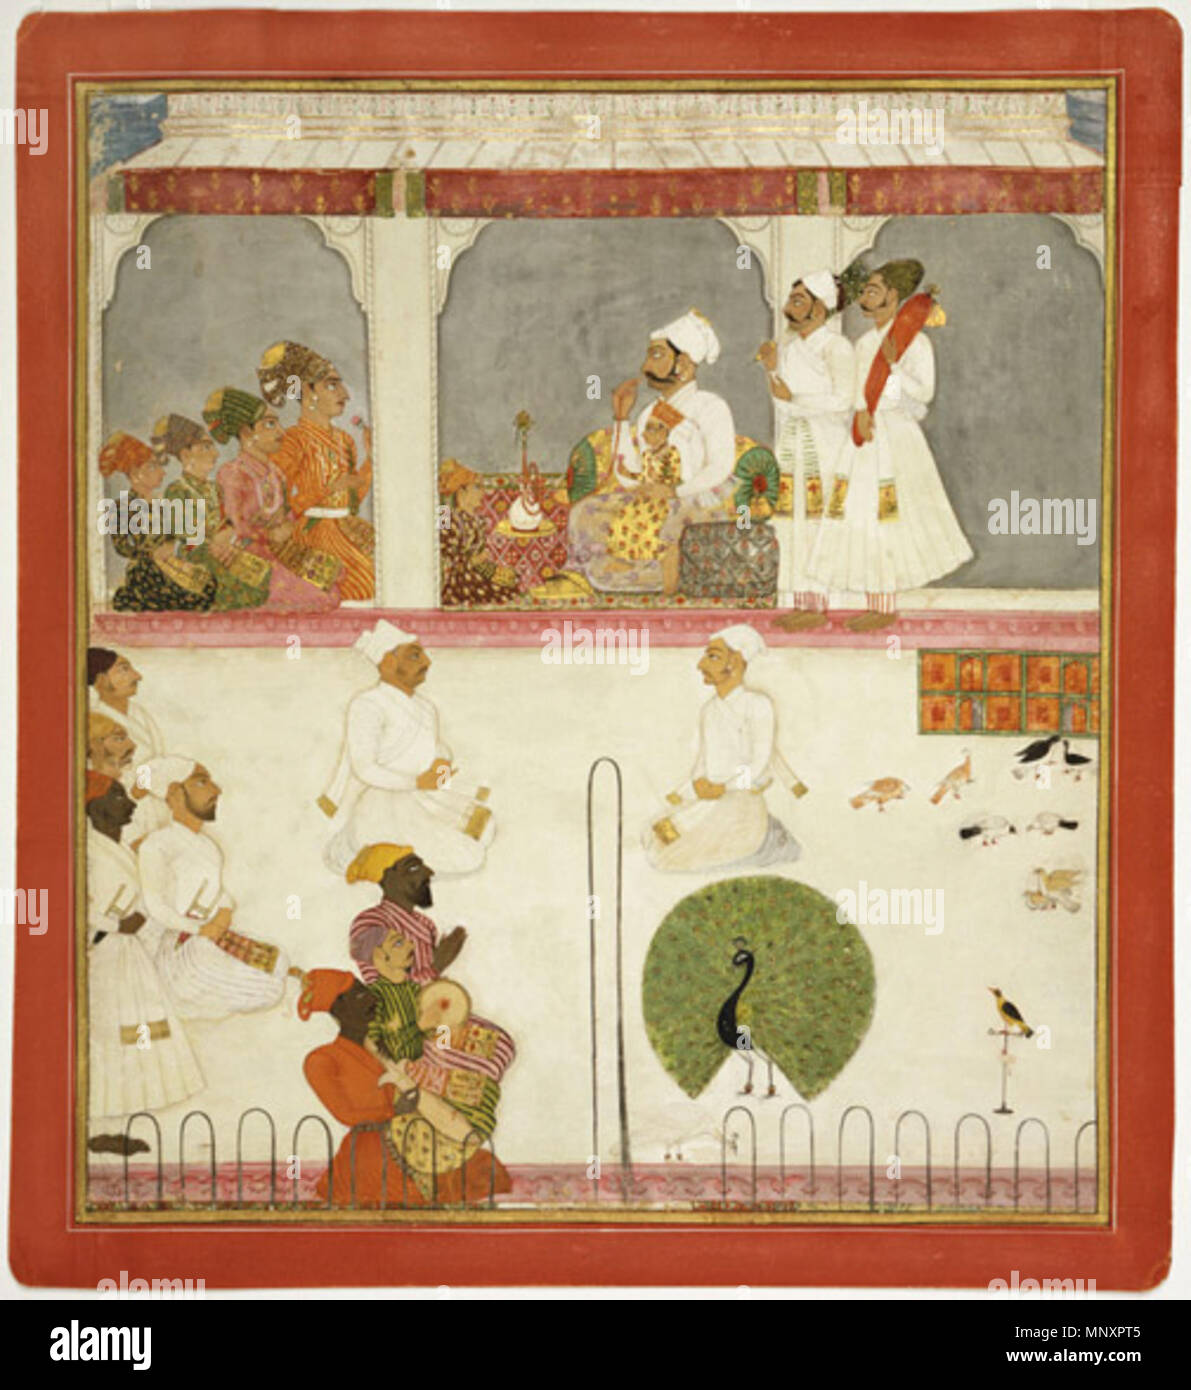 . English: The Six Sons of Maharaja Ajit Singh of Jodhpur on a Visit Made in Jodhpur, Mewar, Rajasthan, India 1720 Artist/maker unknown, India Opaque watercolor and gold on paper 15 3/8 x 14 inches (39.1 x 35.6 cm) Currently not on view 2004-149-47 Alvin O. Bellak Collection, 2004 Label Four young men and two toddlers sit on a terrace with an older man. They are the six sons of Maharaja Ajit Singh, ruler of Jodhpur (reigned 1707–24). The older man is probably the maharaja himself, who was murdered by his two eldest sons when they seized the throne of Marwar only a few years after this painting Stock Photo